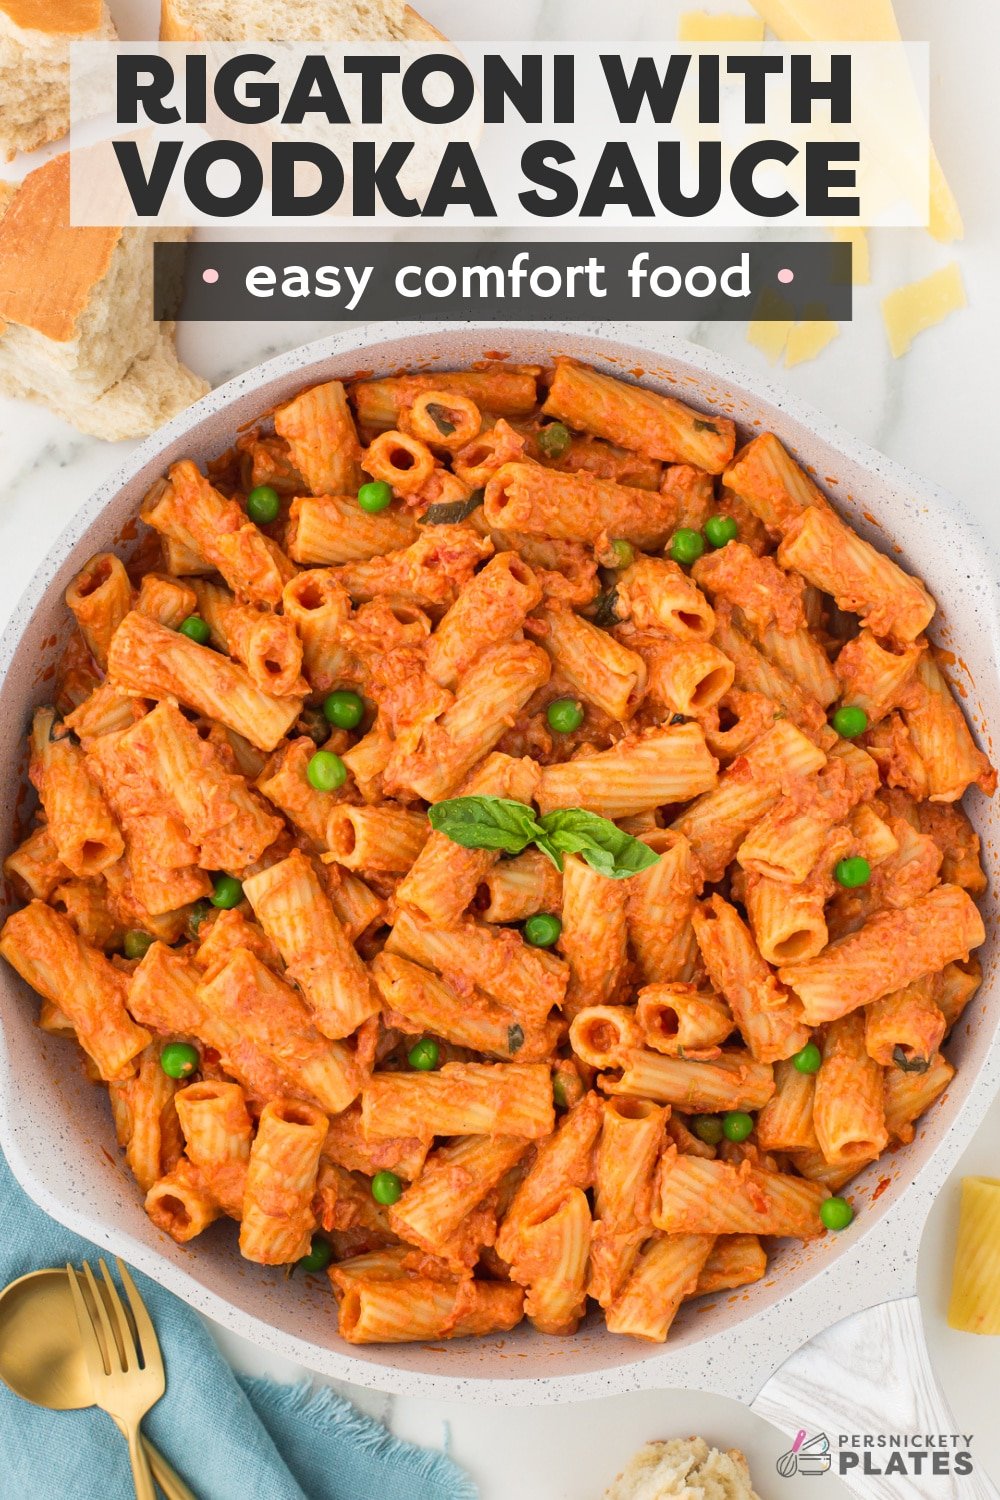 Vodka Rigatoni is a scrumptious pasta dish made with al dente pasta tossed in a rich vodka sauce made with tomatoes, heavy cream, an ounce of vodka, and parmesan cheese. Finished with fresh basil and peas, this easy and elegant one-pan meal is perfect for busy weeknights and fancier occasions!  | www.persnicketyplates.com